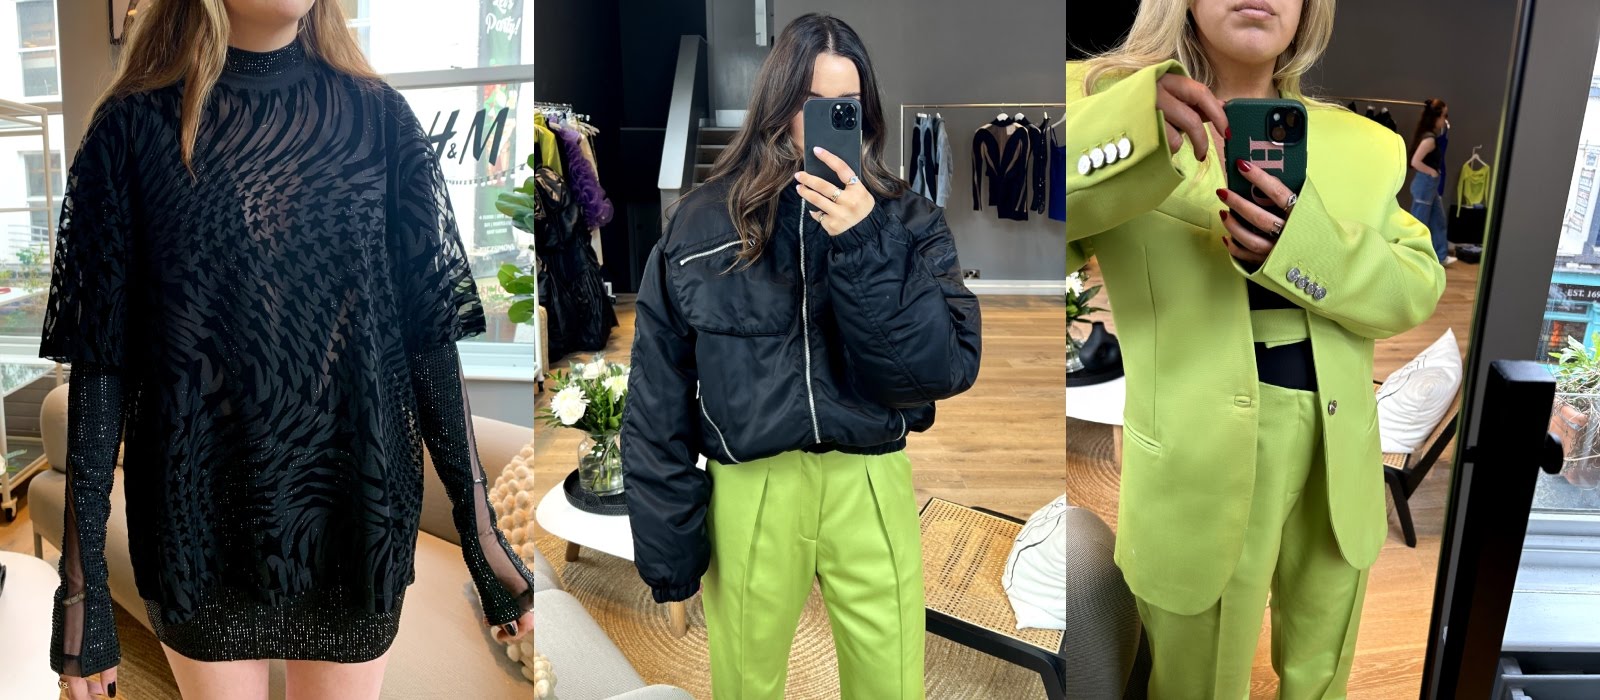 Team IMAGE tried on H&M x Mugler – here’s what we loved